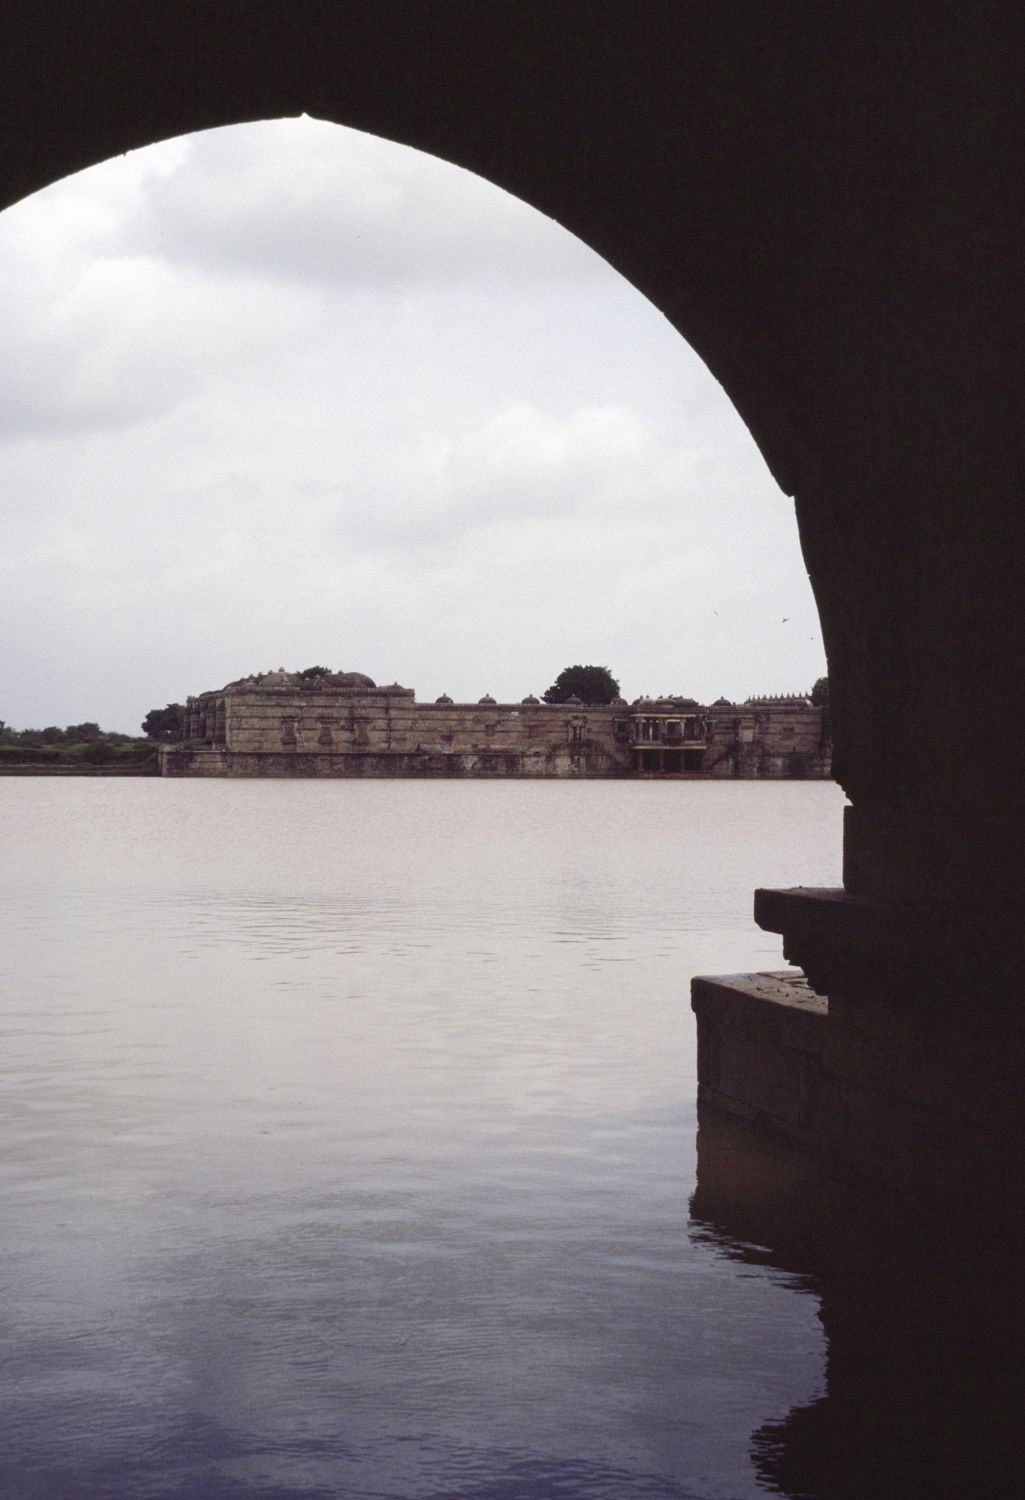 View through archway of Mahmud Shah's Palace on the south bank of the tank, facing north across water. The southern facade of the mosque and tombs is visible in background.&nbsp;